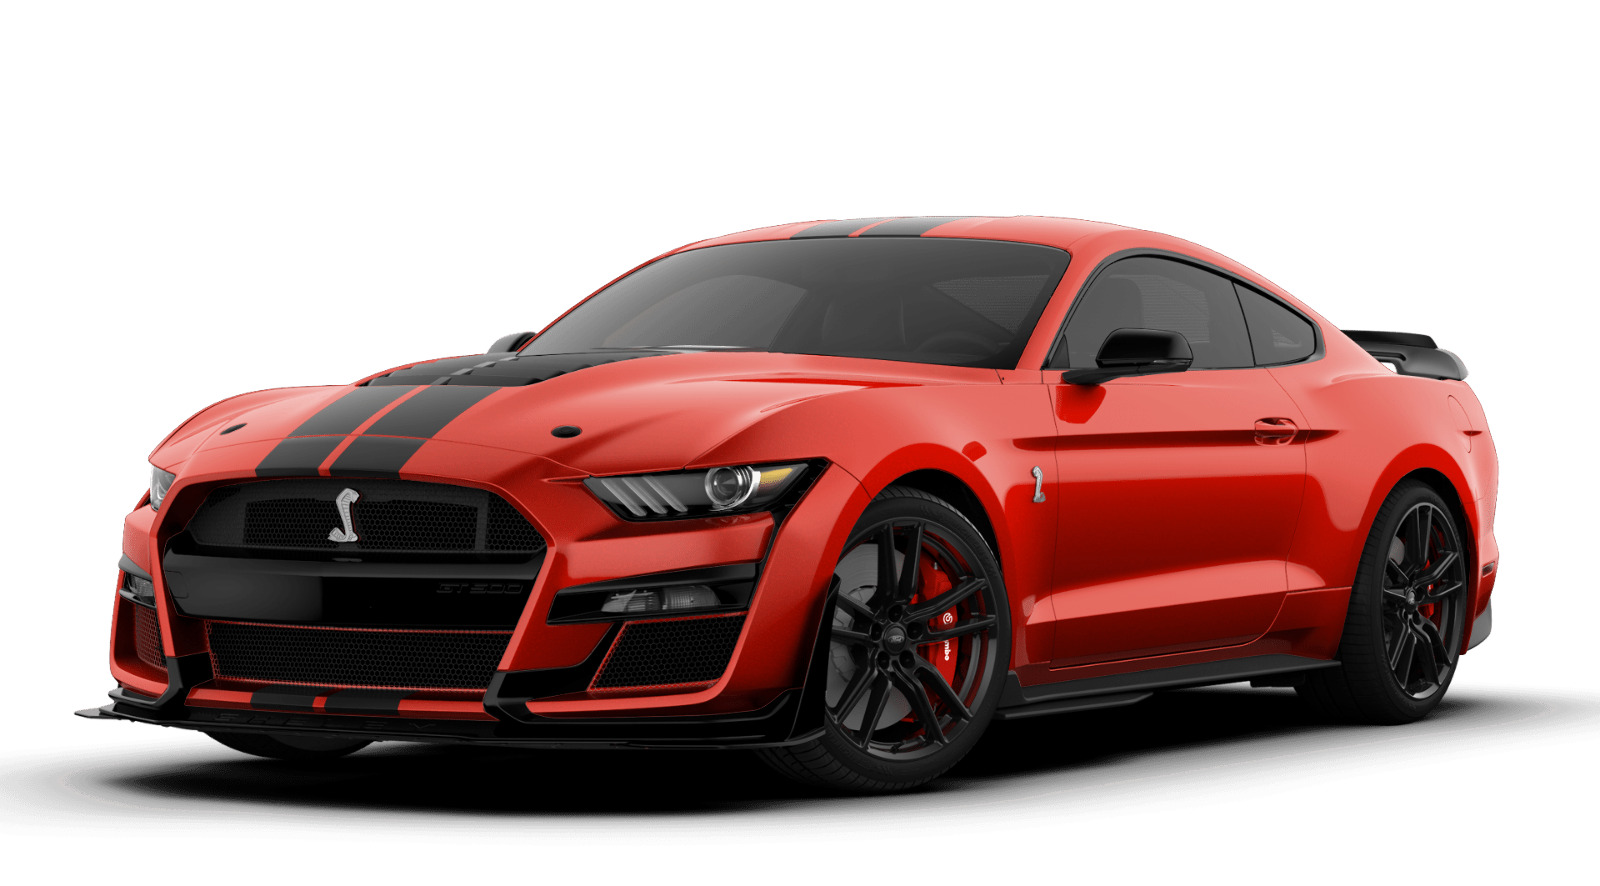 2020 Mustang Shelby GT500 Car Cutout GARAGE STEEL SIGN Race Red Black Stripes